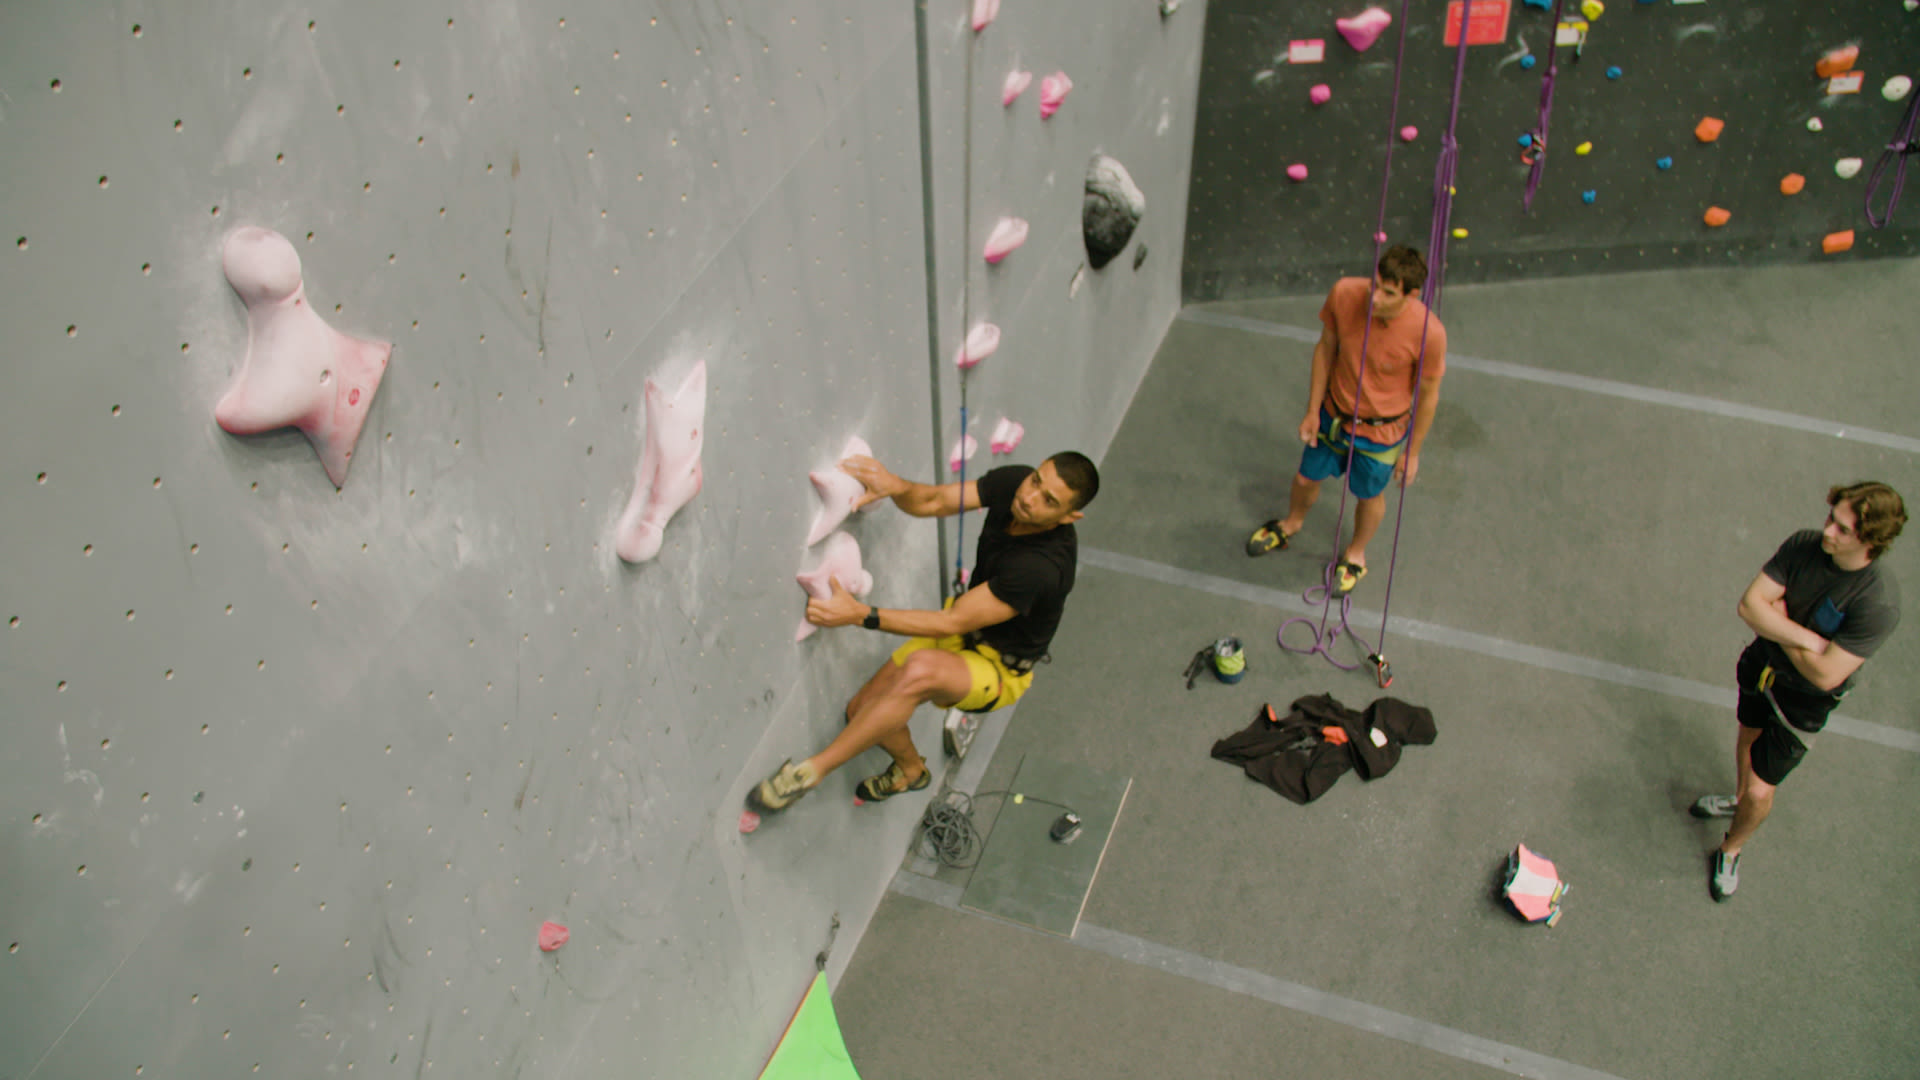 Sporty couple of climbers dressed in rock climbing outfit training